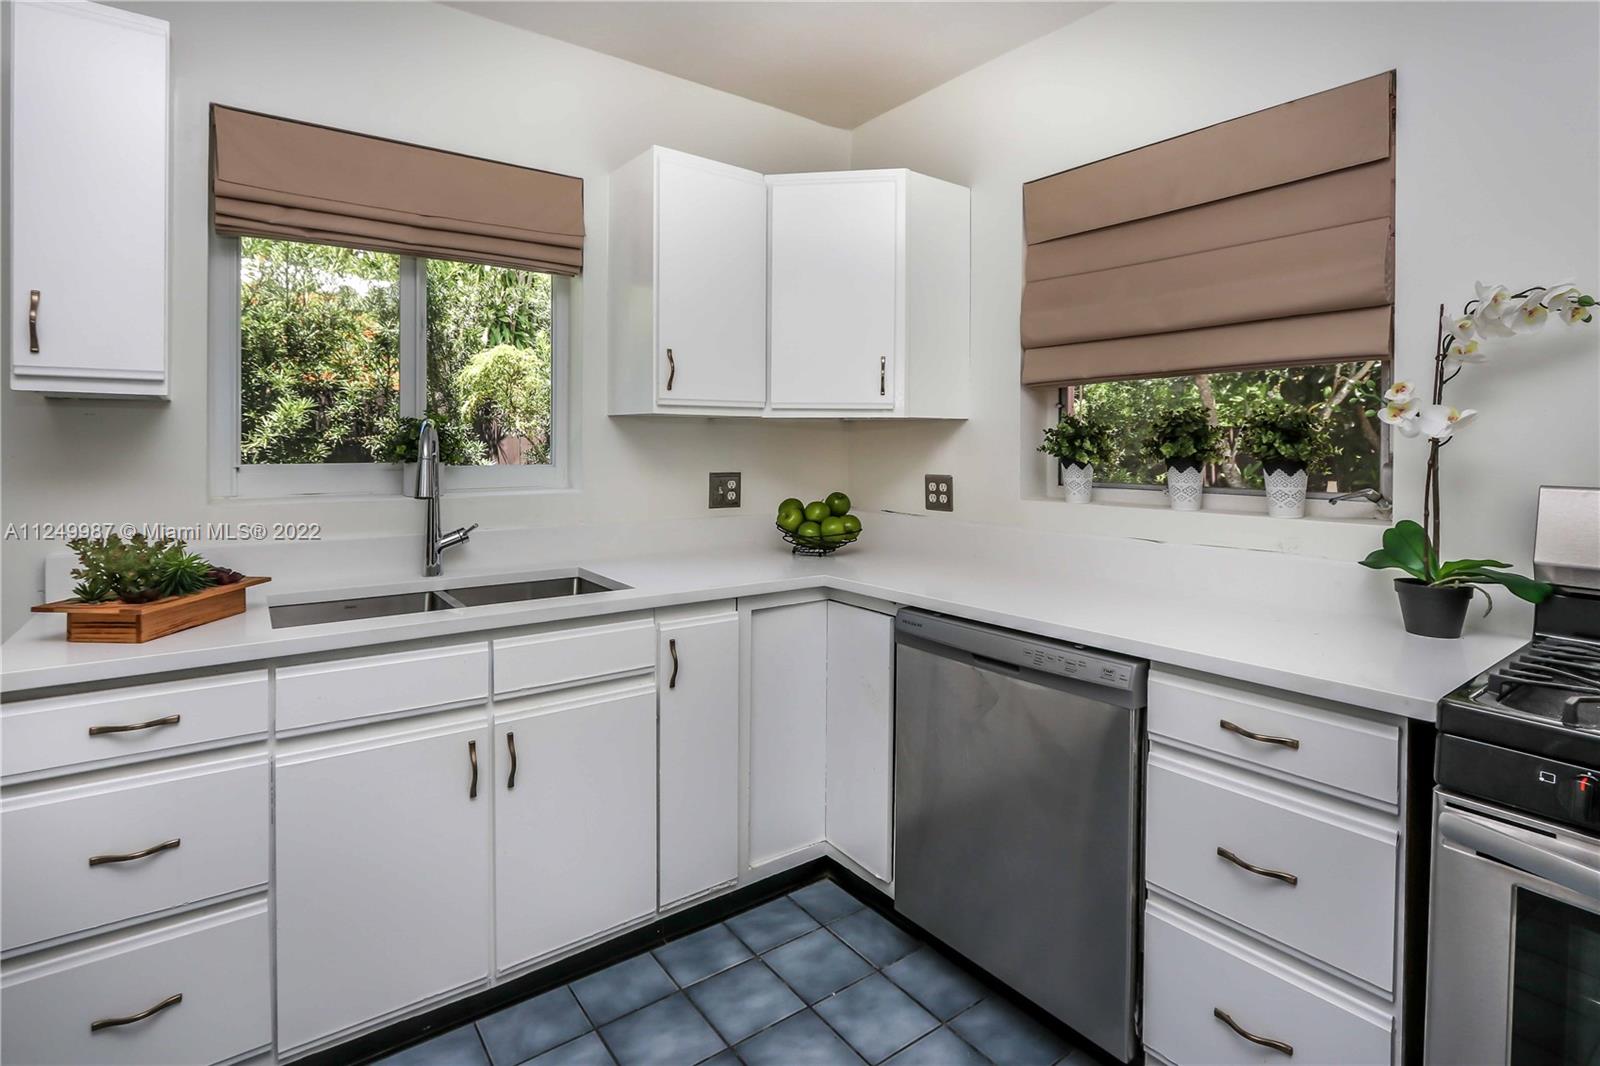 a kitchen with white cabinets a window and appliances